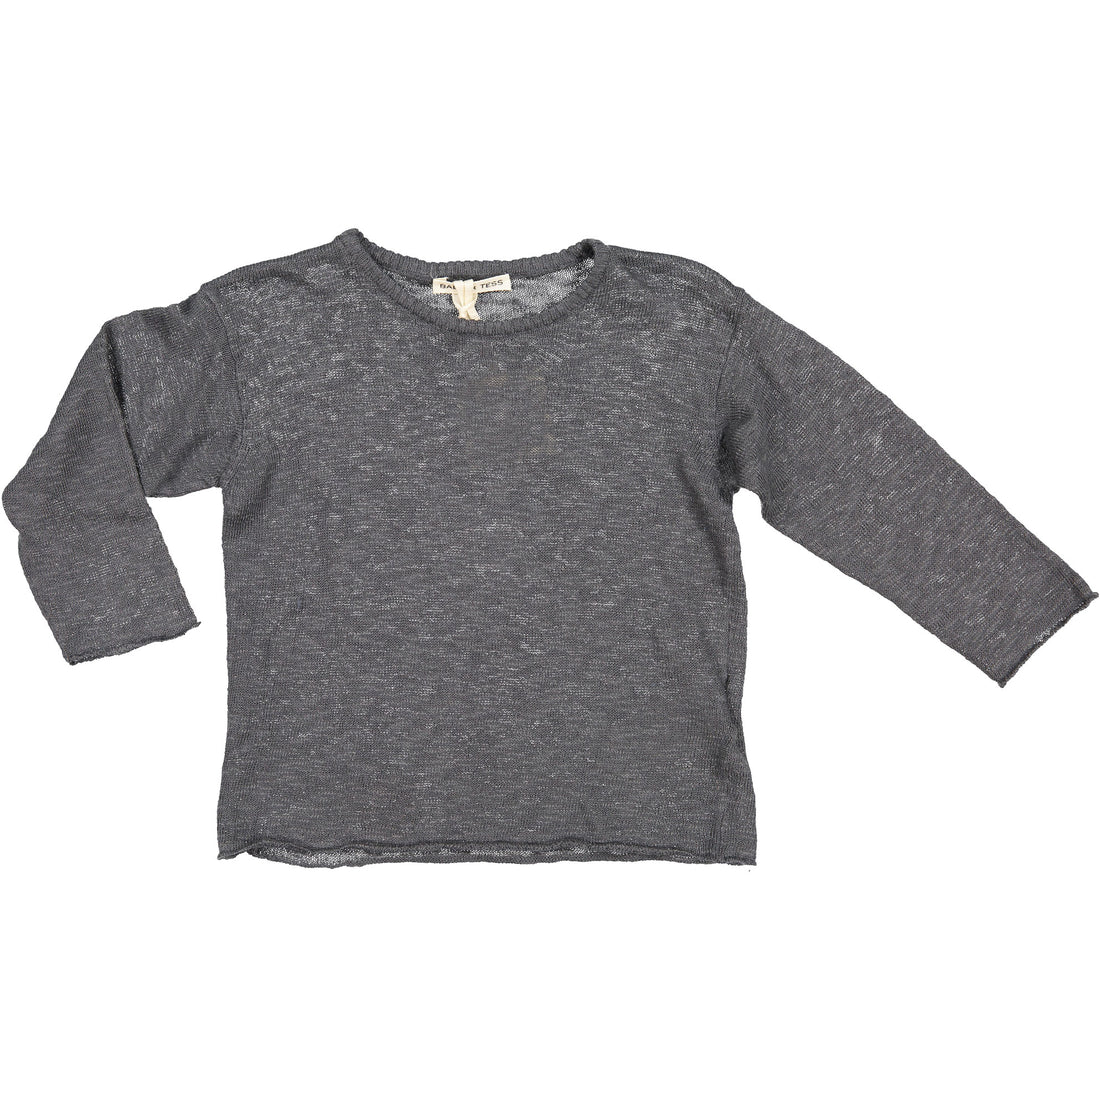 Babe and Tess Iron Linen Sweater